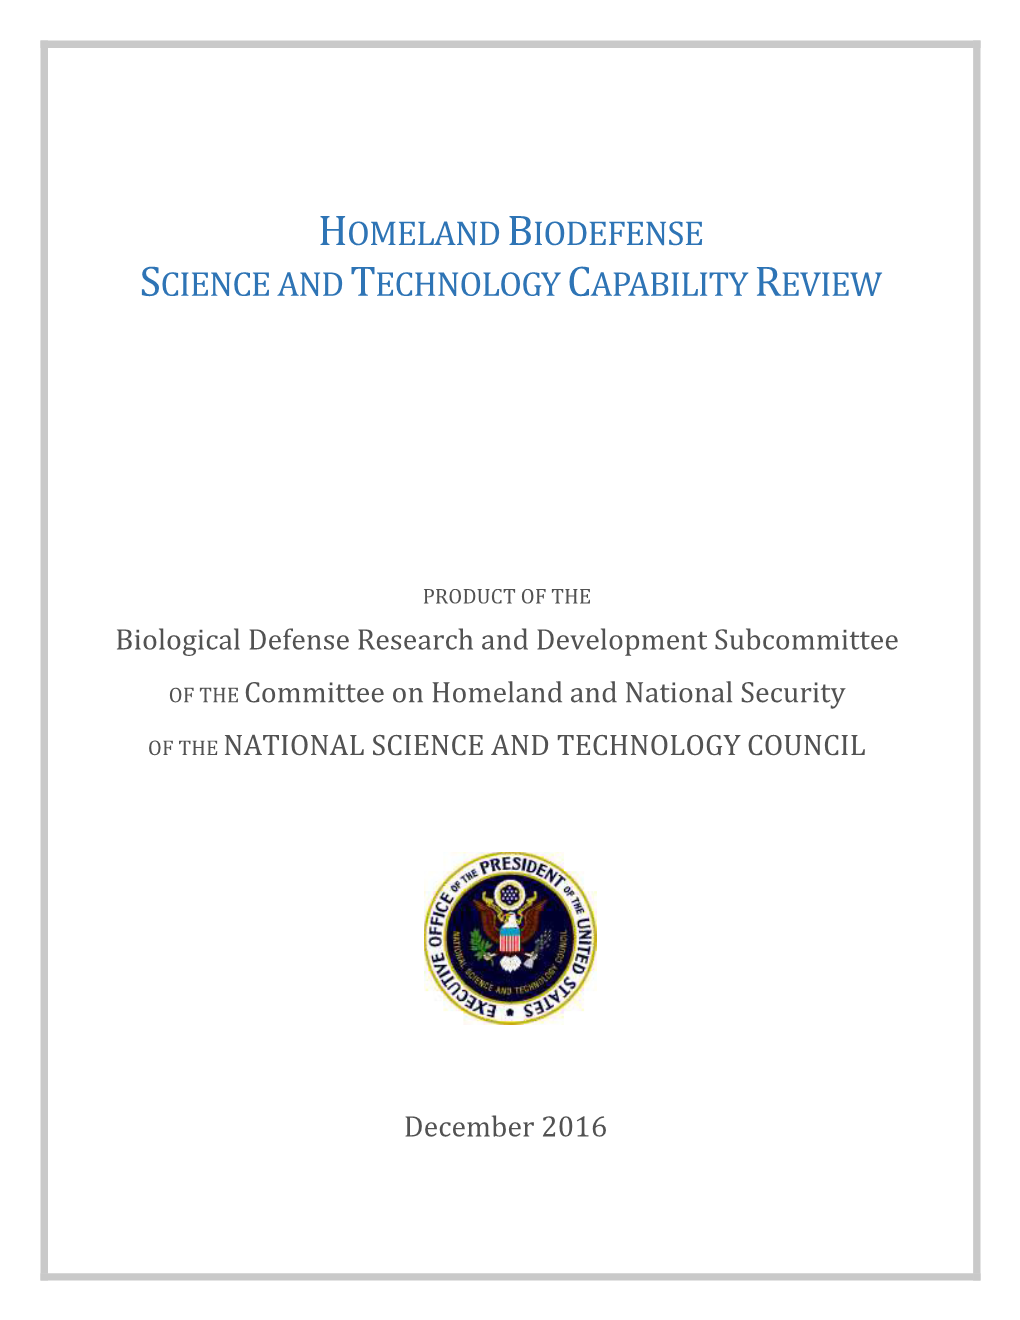 The Homeland Biodefense Science and Technology Capability Review